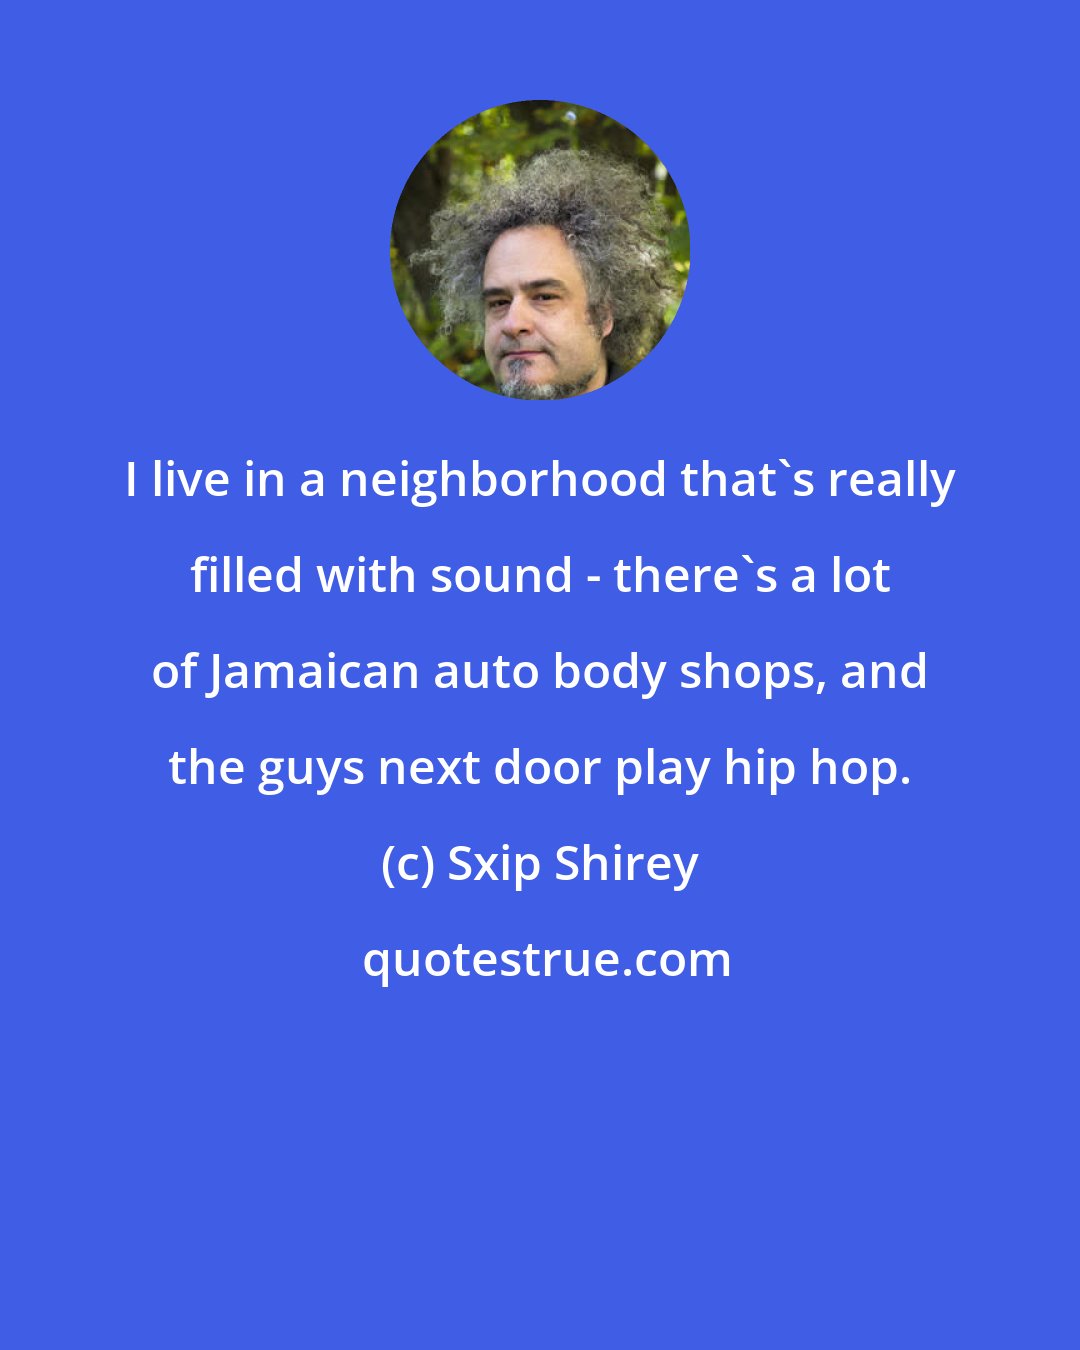 Sxip Shirey: I live in a neighborhood that's really filled with sound - there's a lot of Jamaican auto body shops, and the guys next door play hip hop.